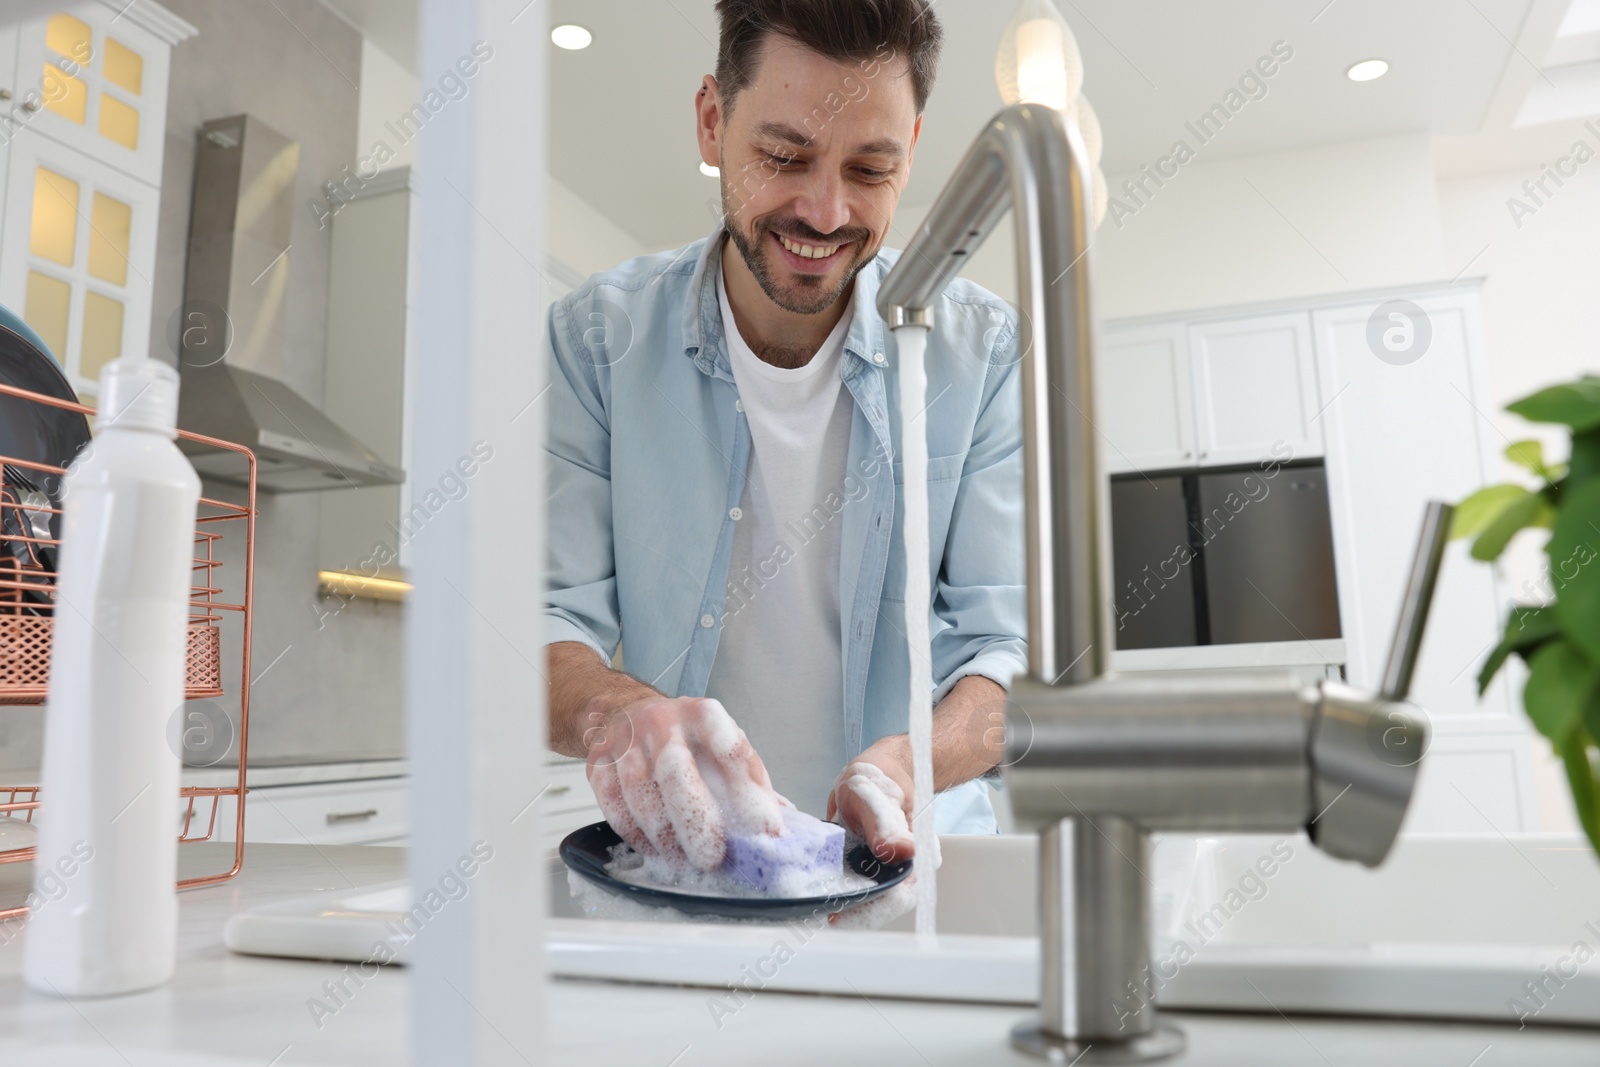 Photo of Man washing plate above sink in kitchen, view from outside